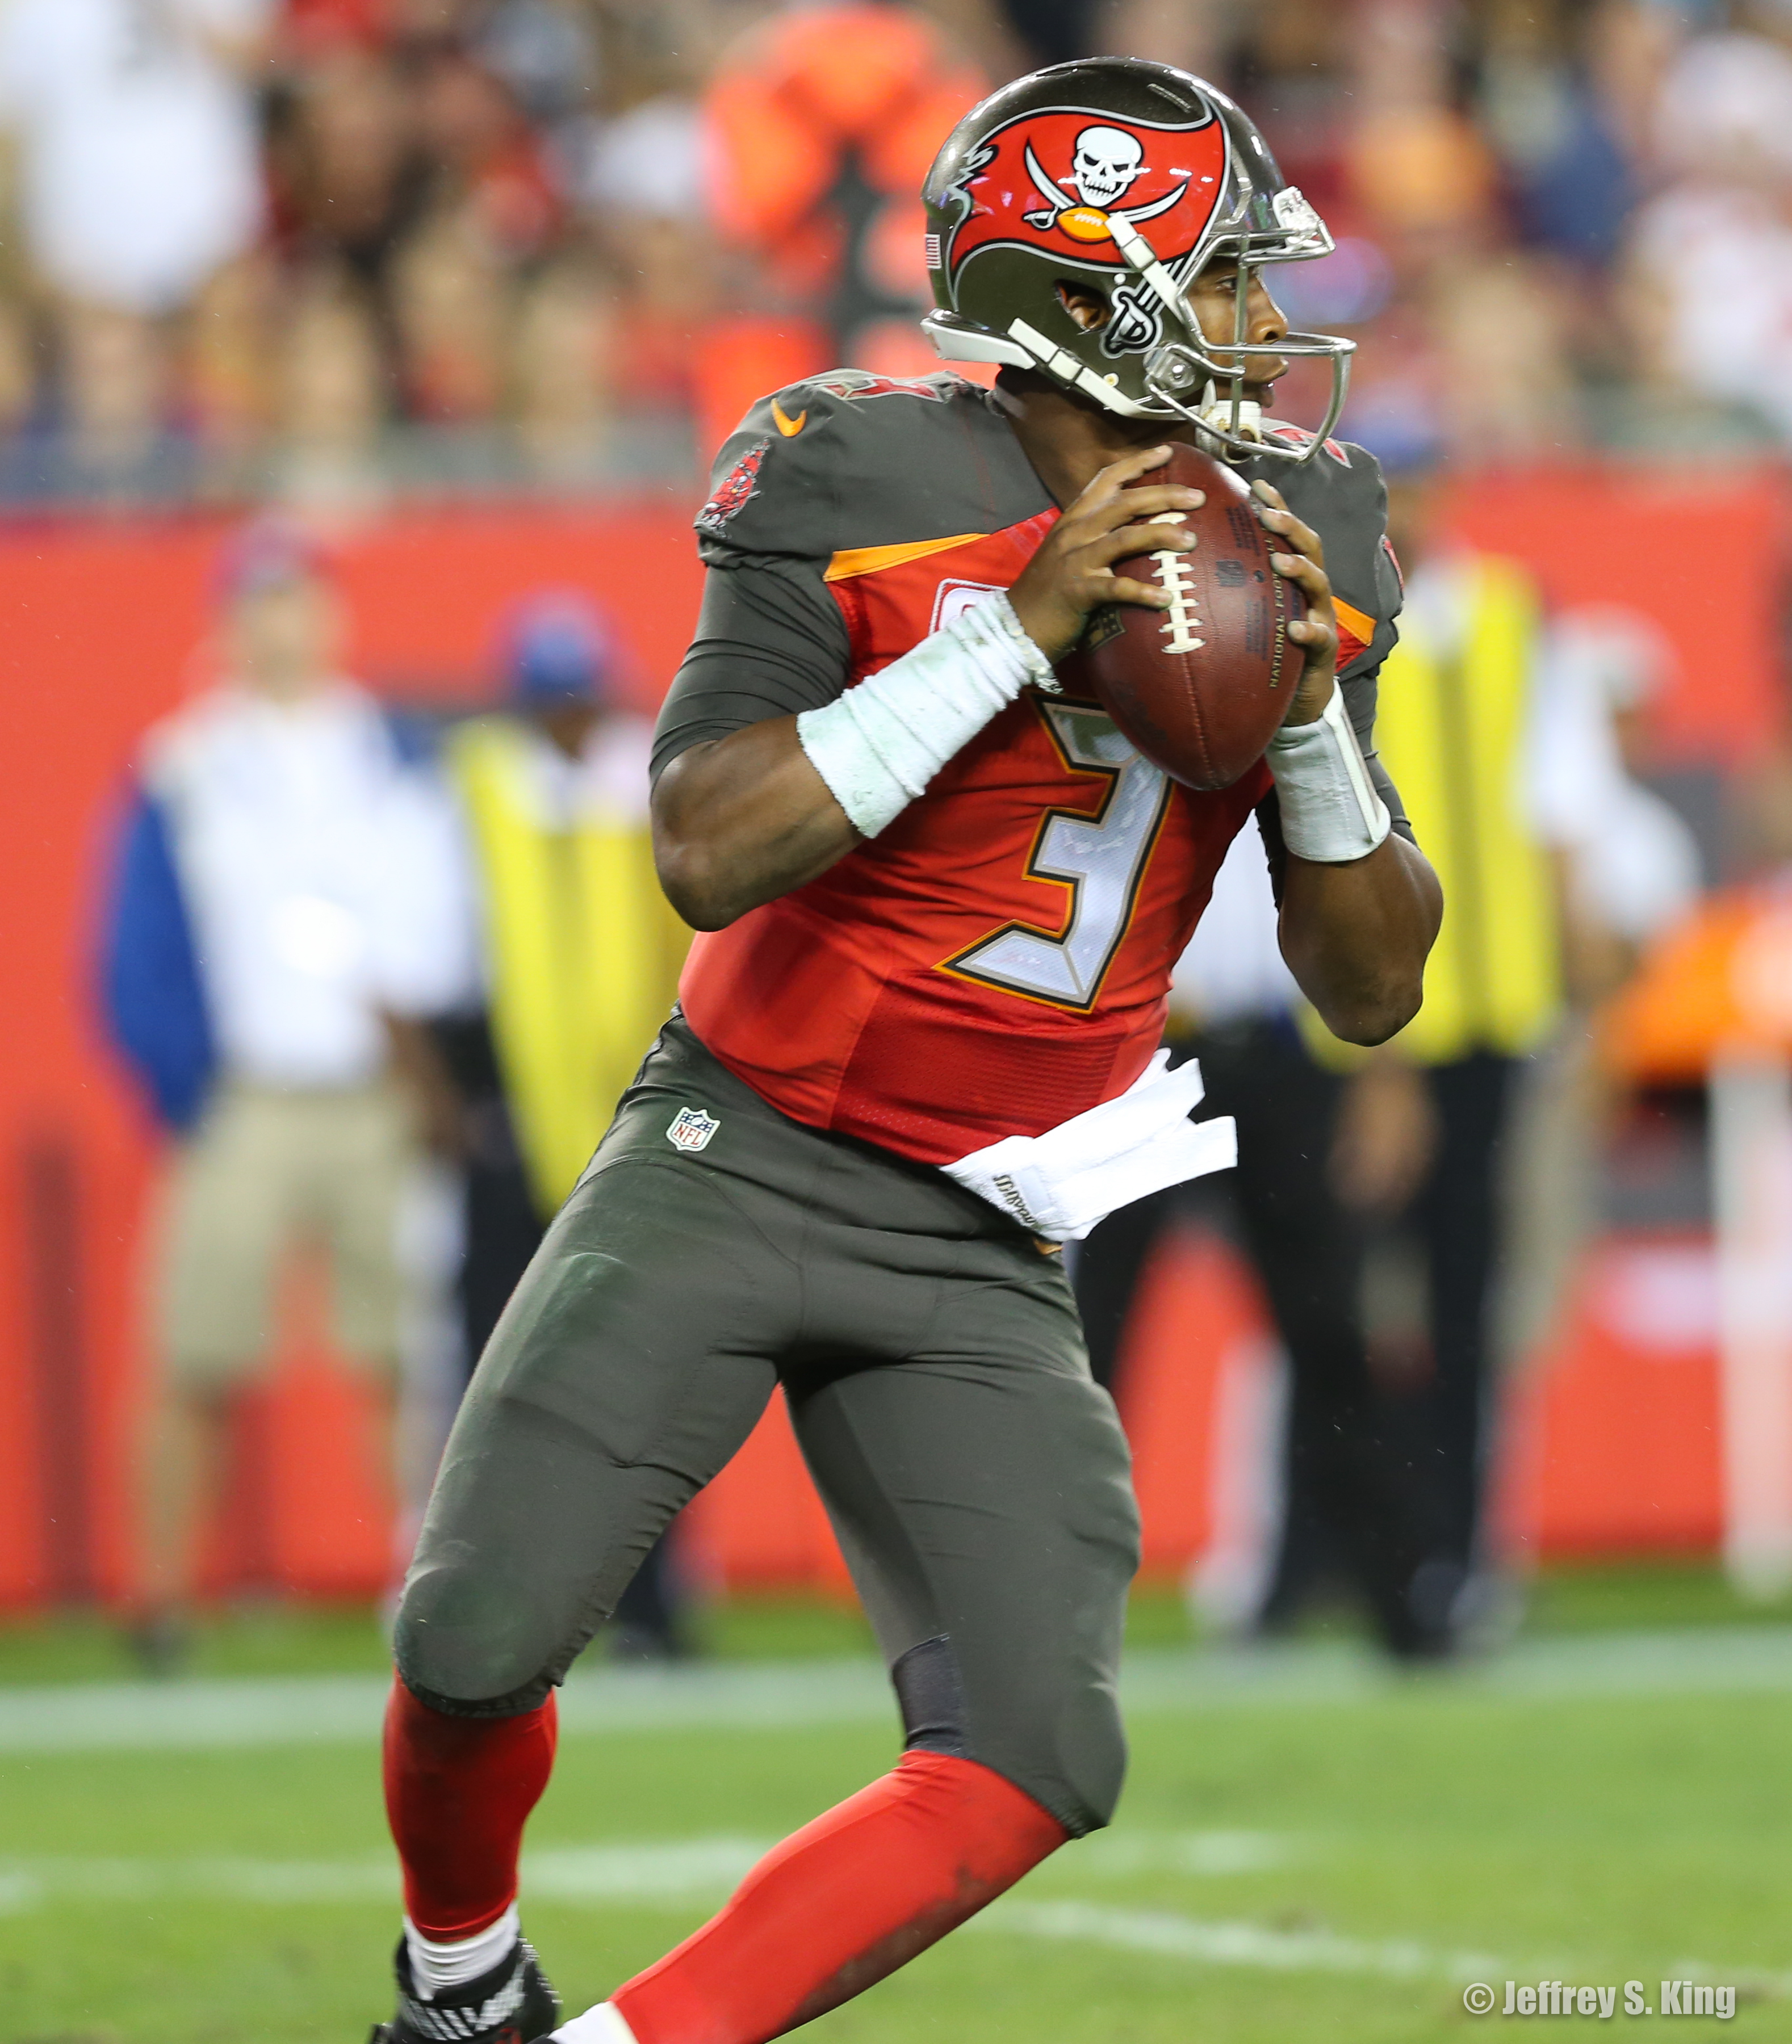 Winston didn't have one of his finest games fourth Bucs.